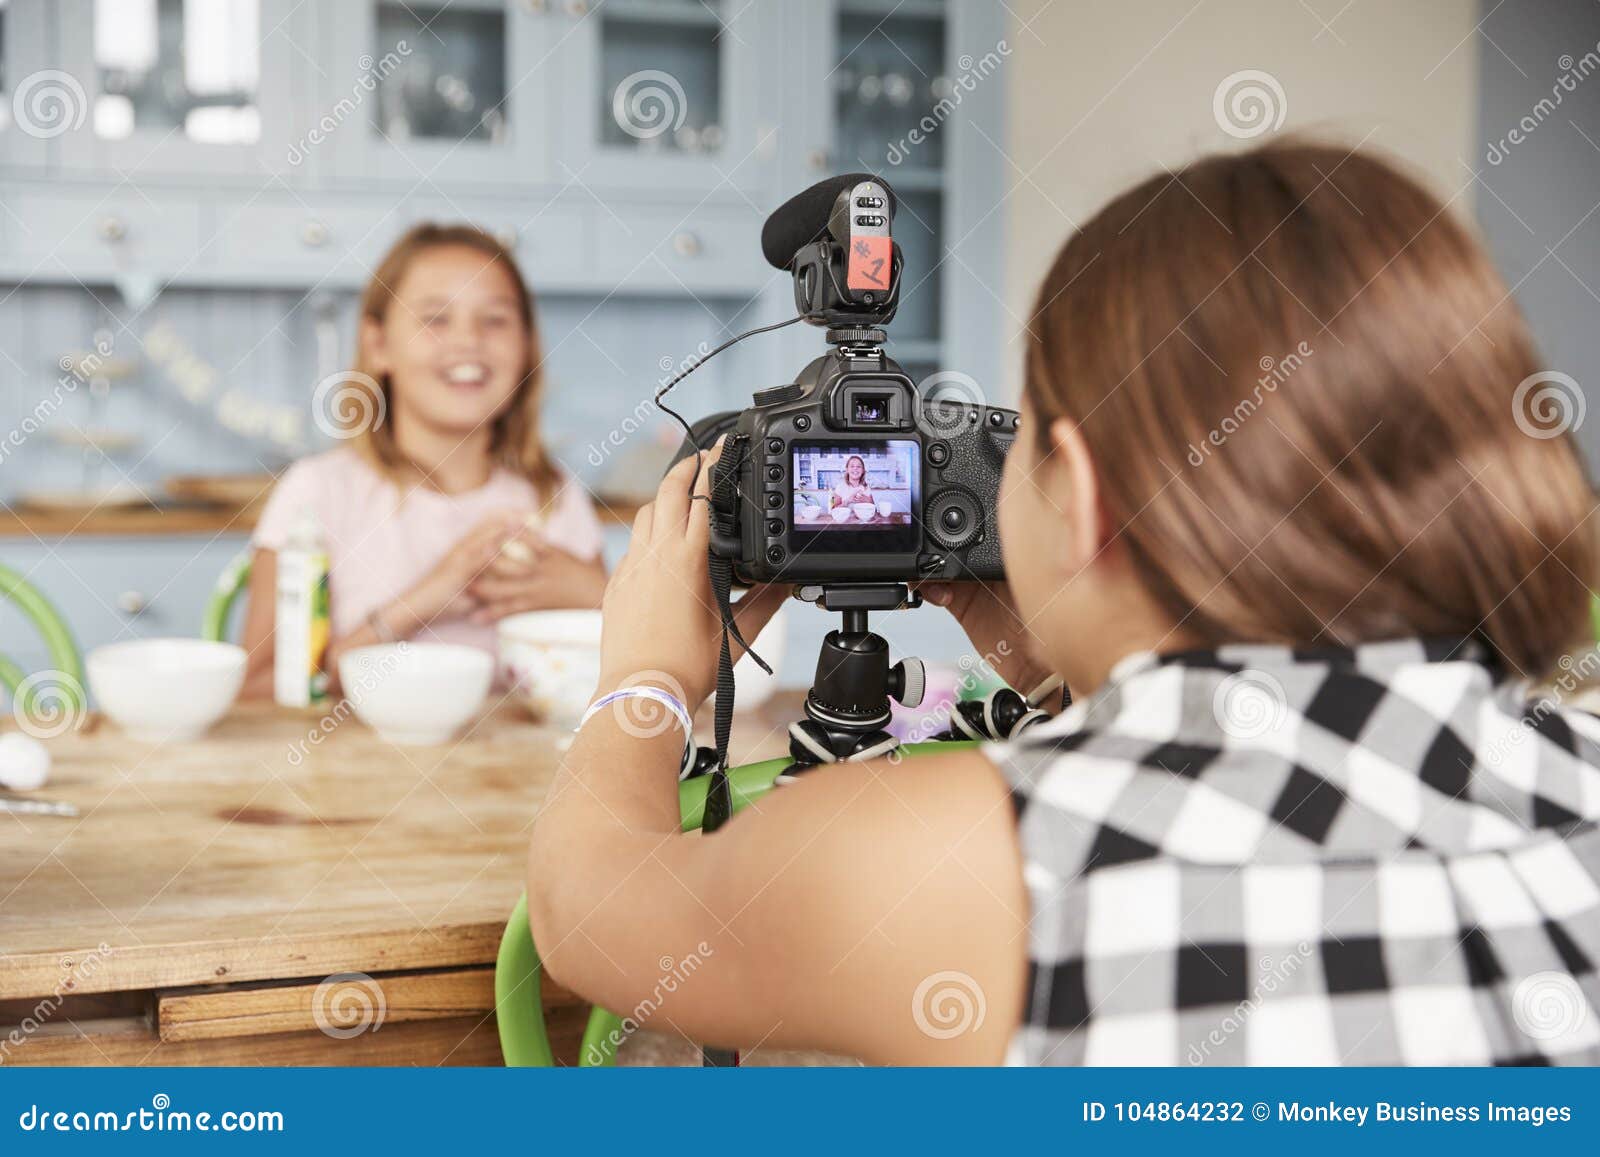 girl filming her friend for cookery video blog in kitchen